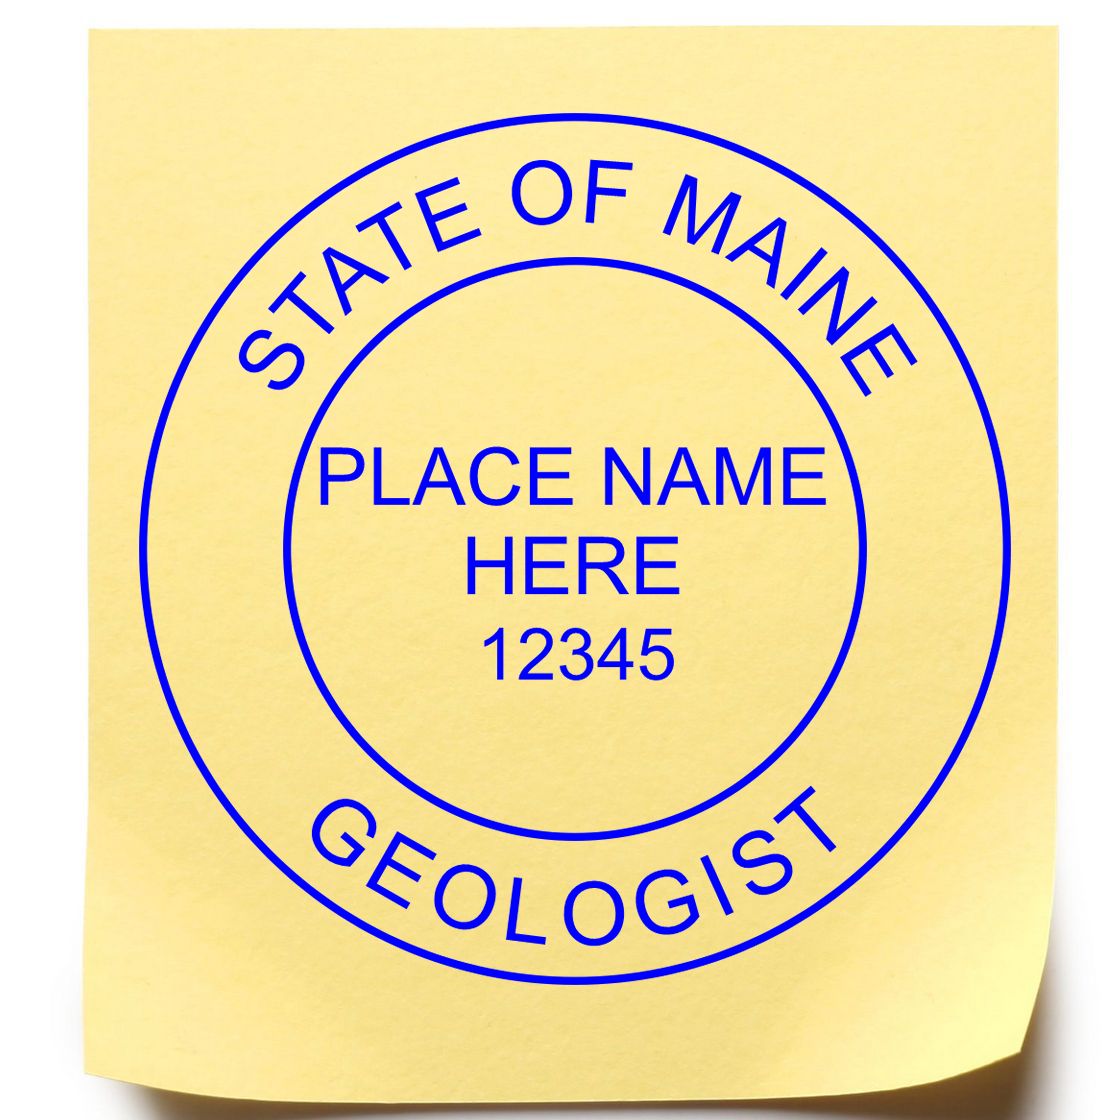 The Slim Pre-Inked Maine Professional Geologist Seal Stamp stamp impression comes to life with a crisp, detailed image stamped on paper - showcasing true professional quality.